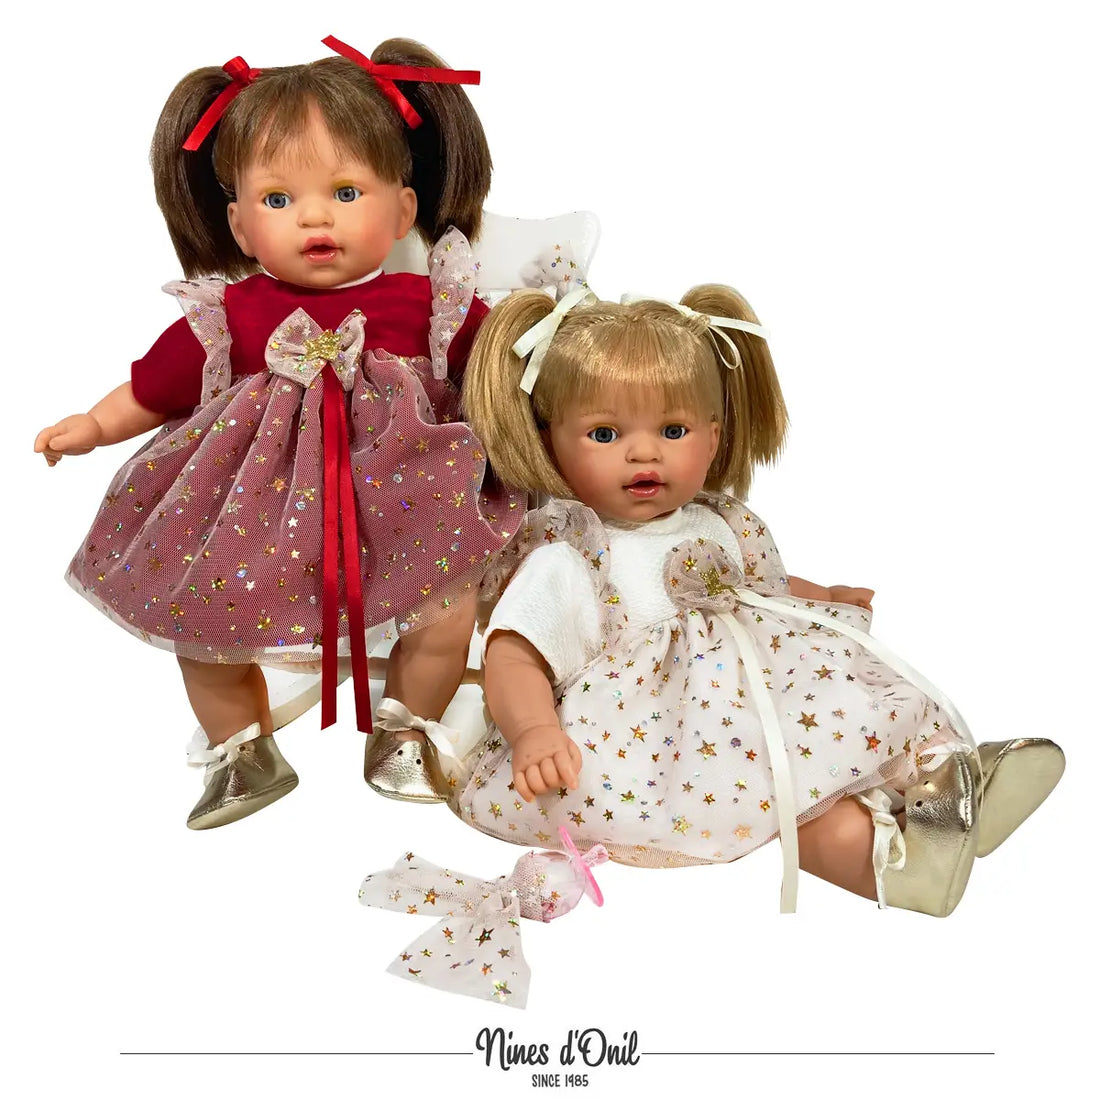 Handcrafted Collectible Alex (White Dress) Christmas Baby Doll by Nines D&